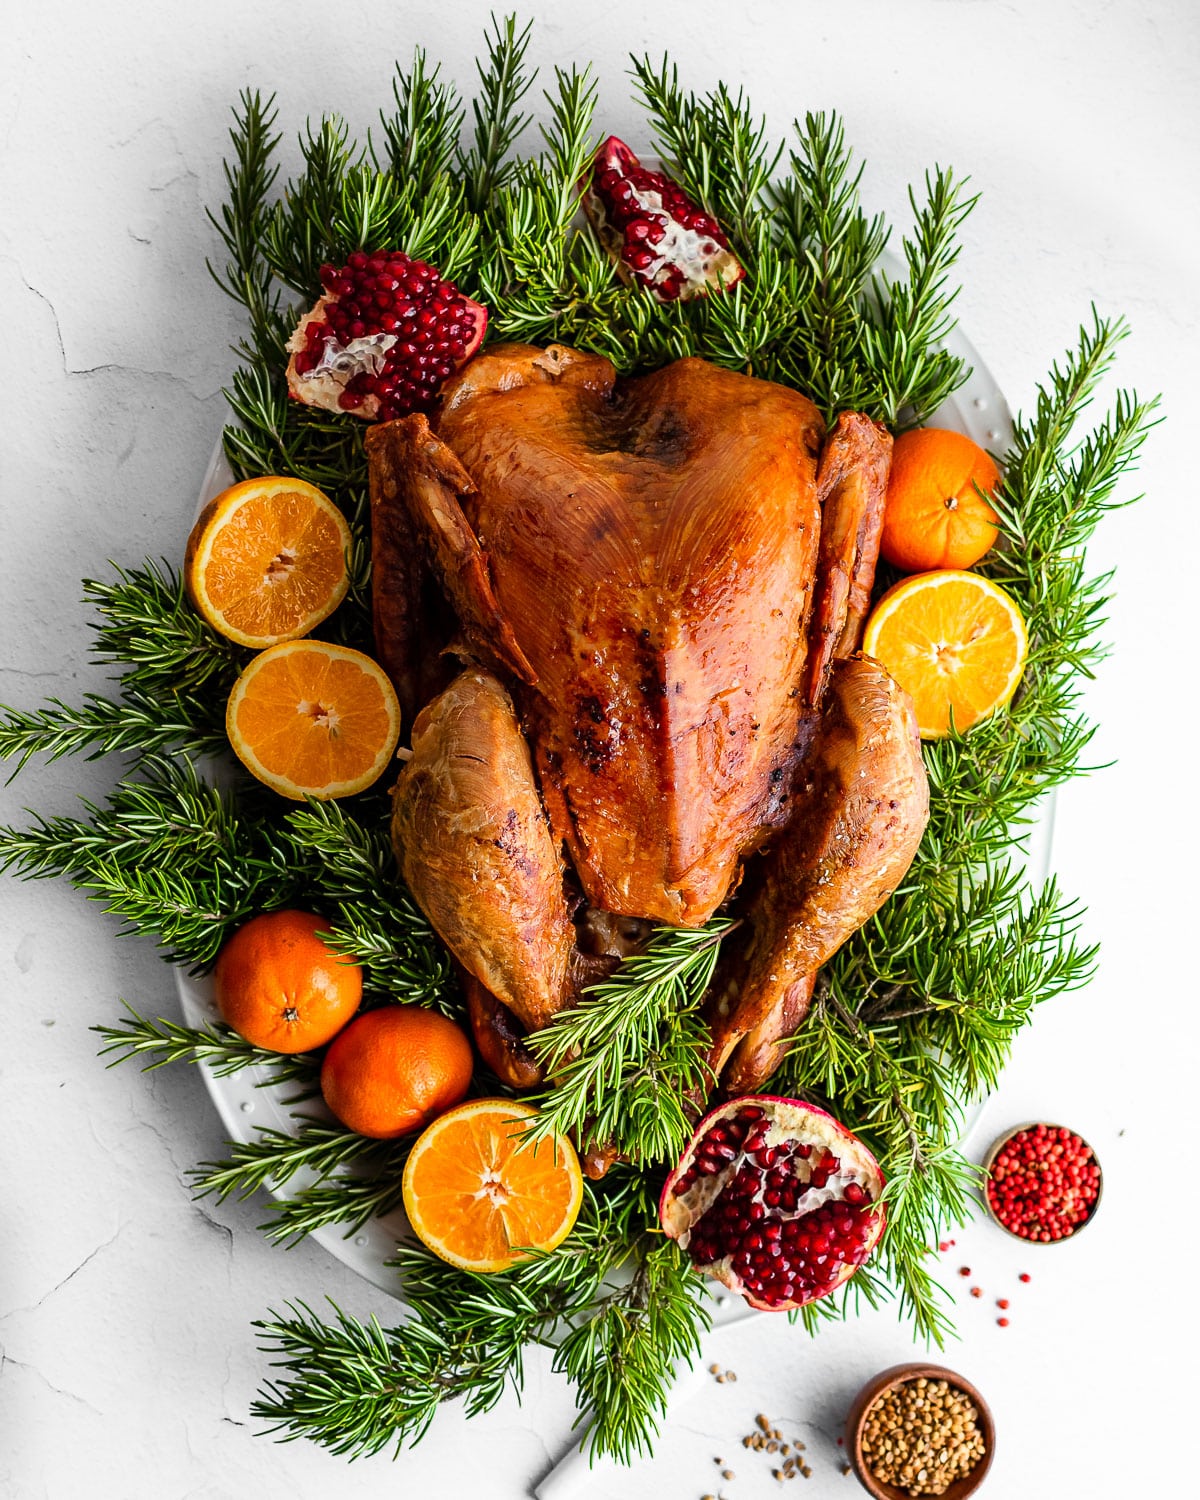 Maple-Brined Turkey on Bed of Rosemary Garnished with Pomegranates and Oranges